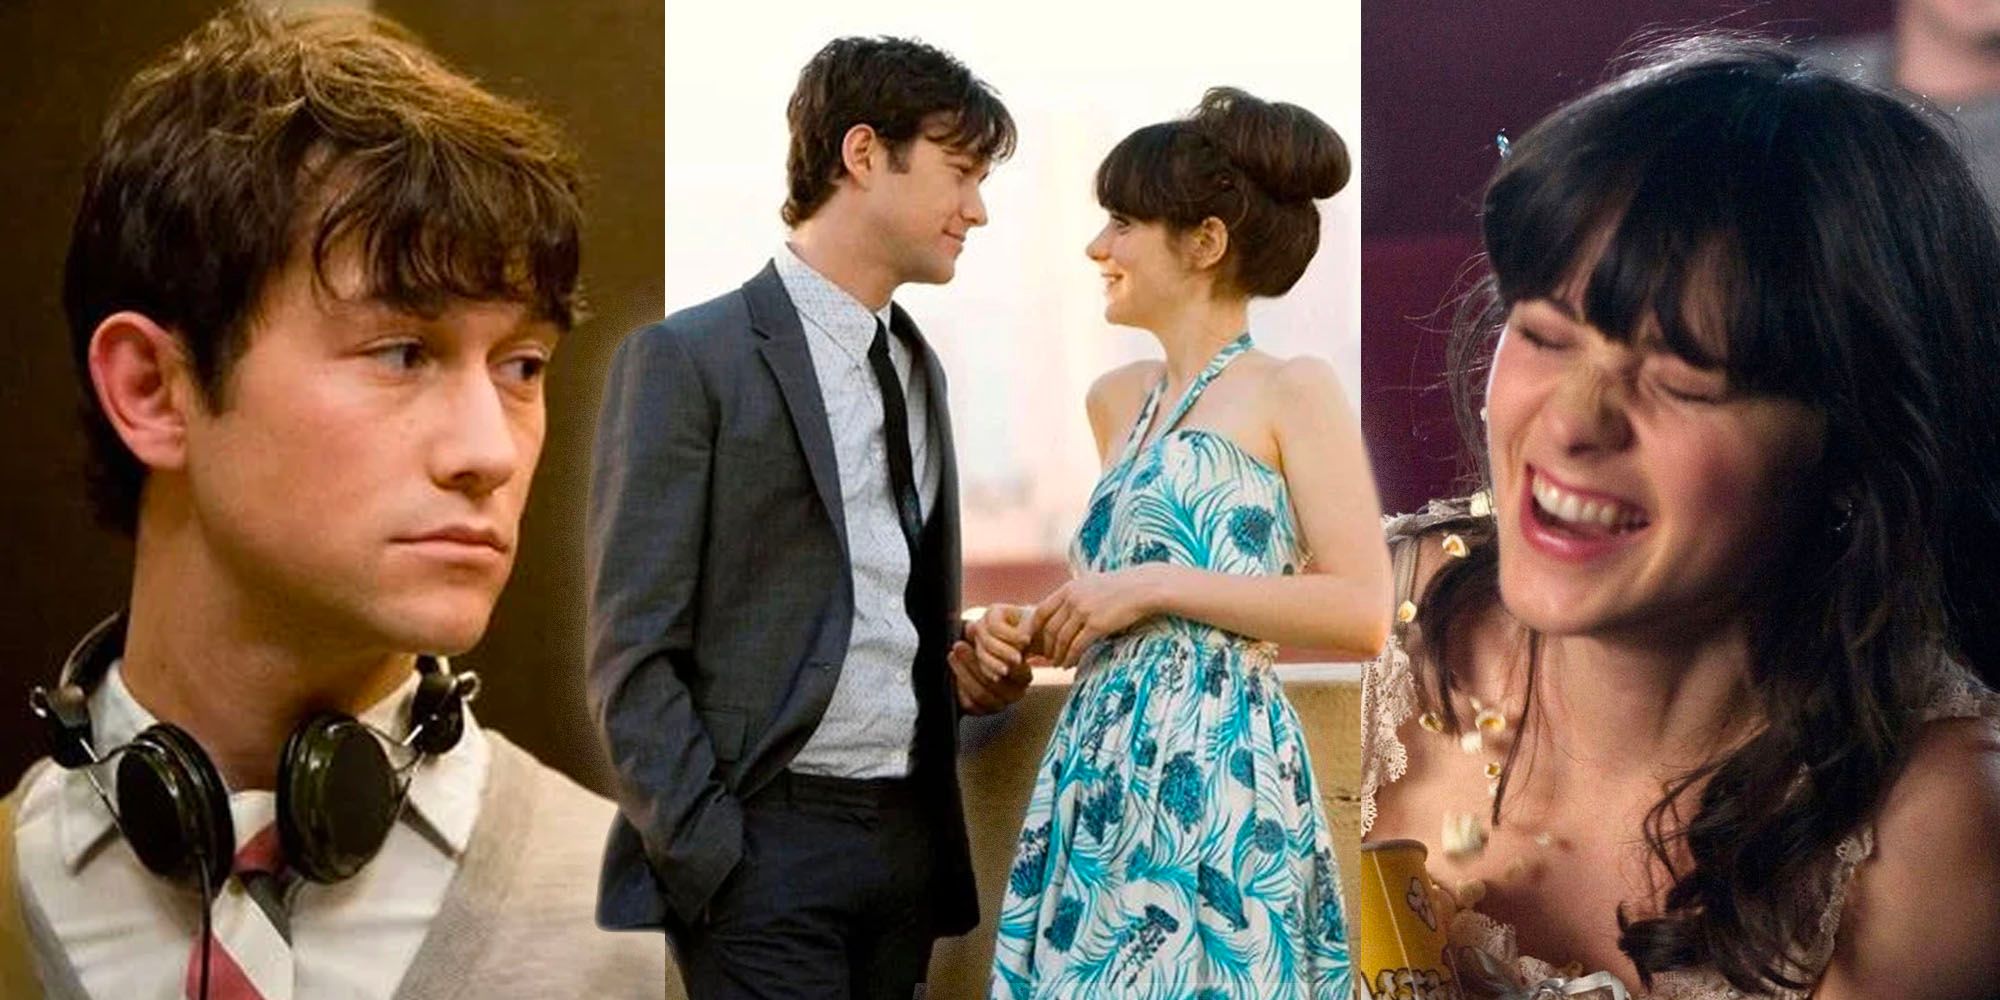 The Relationship in '500 Days of Summer' Is the Worst